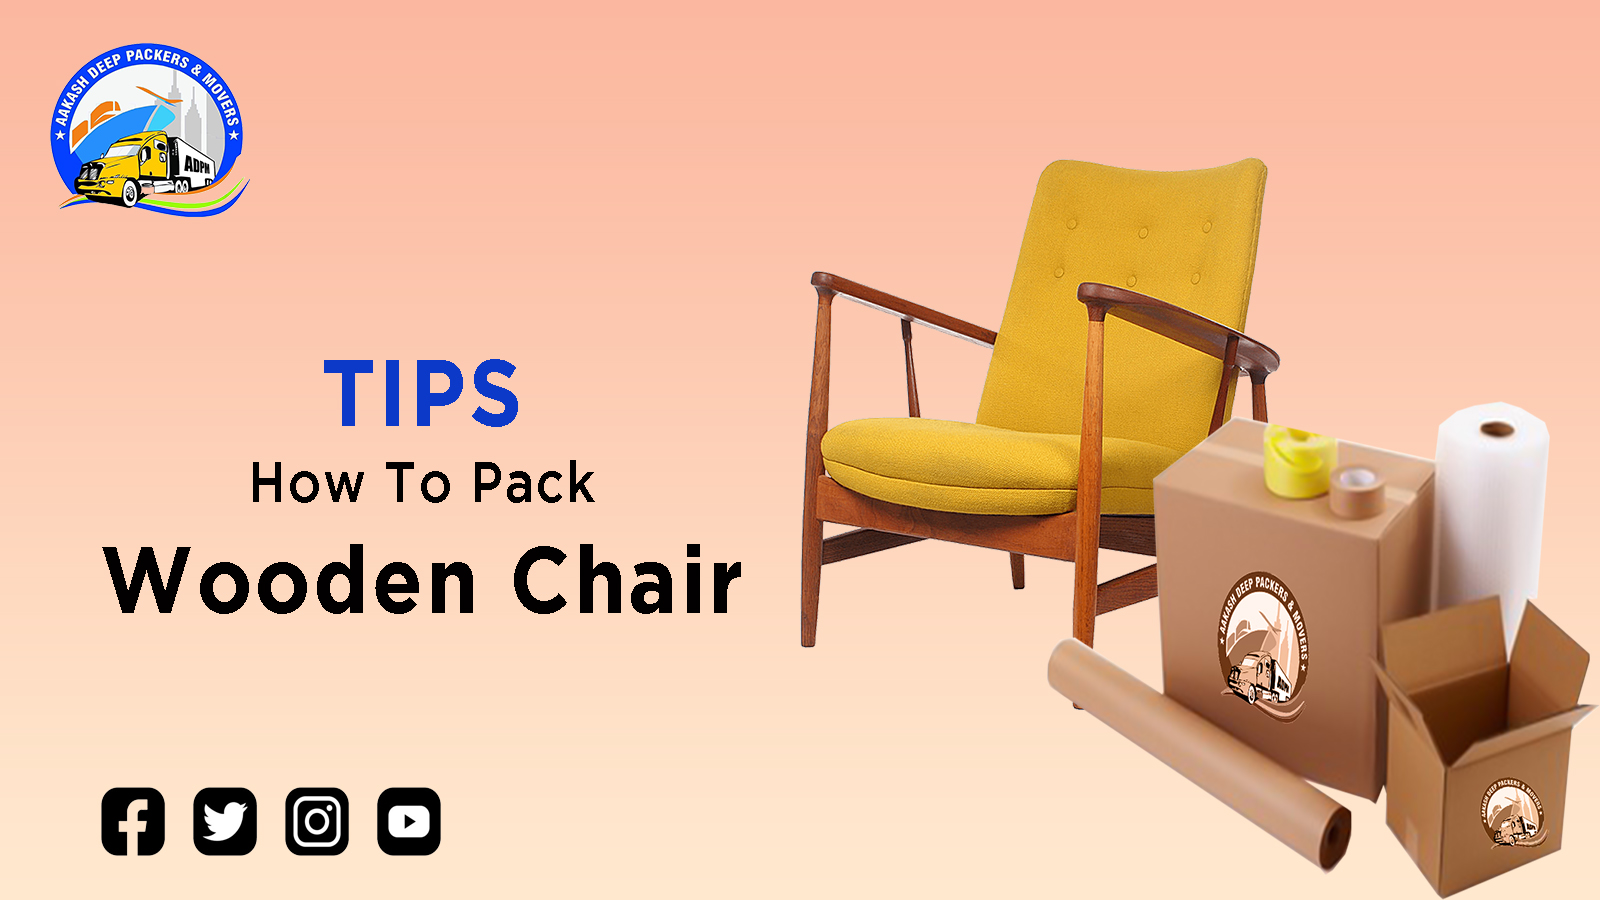 How to pack wooden chair